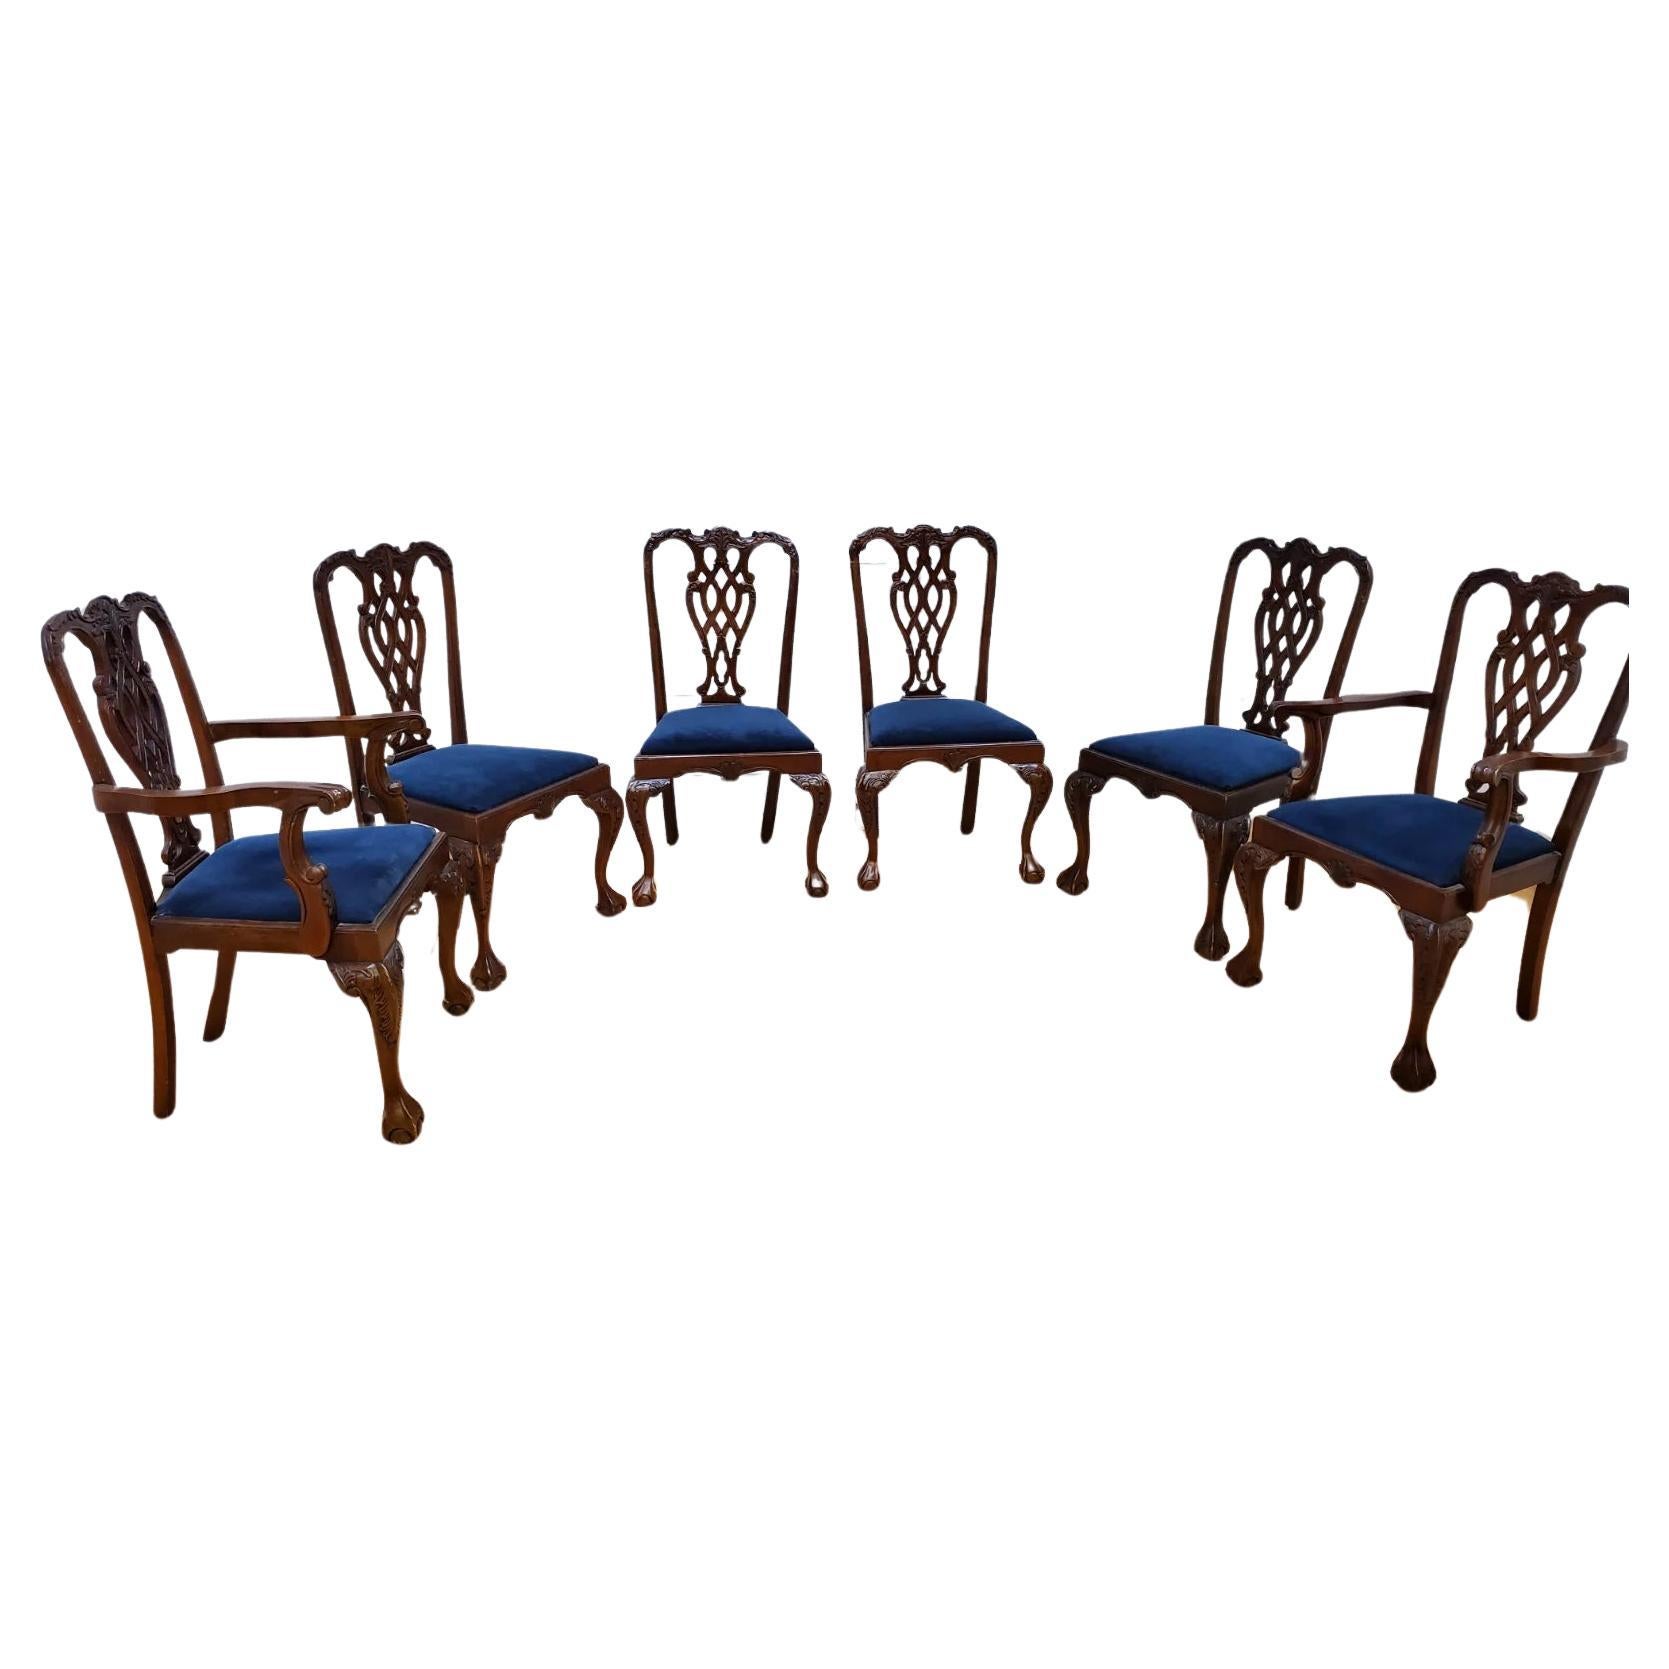 Antique Hand Carved Mahogany Chippendale Eagle Claw Dining Chairs - Set of 6 For Sale